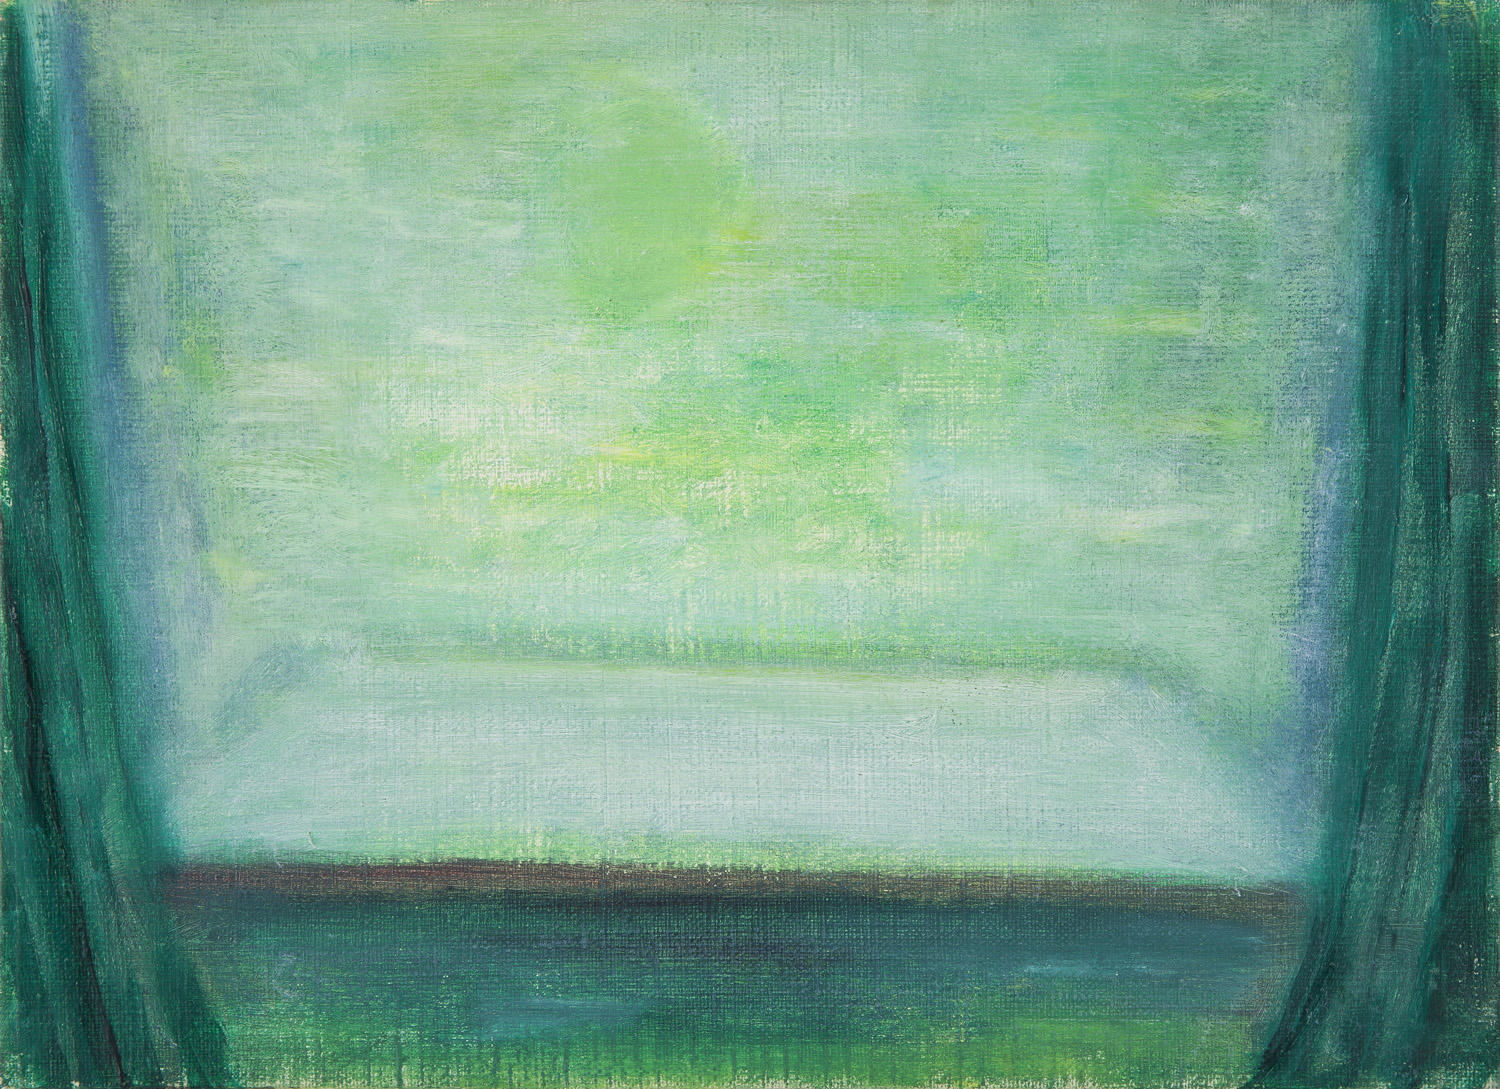 The Human Stage on the Earth, 1998, Oil on canvas, 24x33.5cm